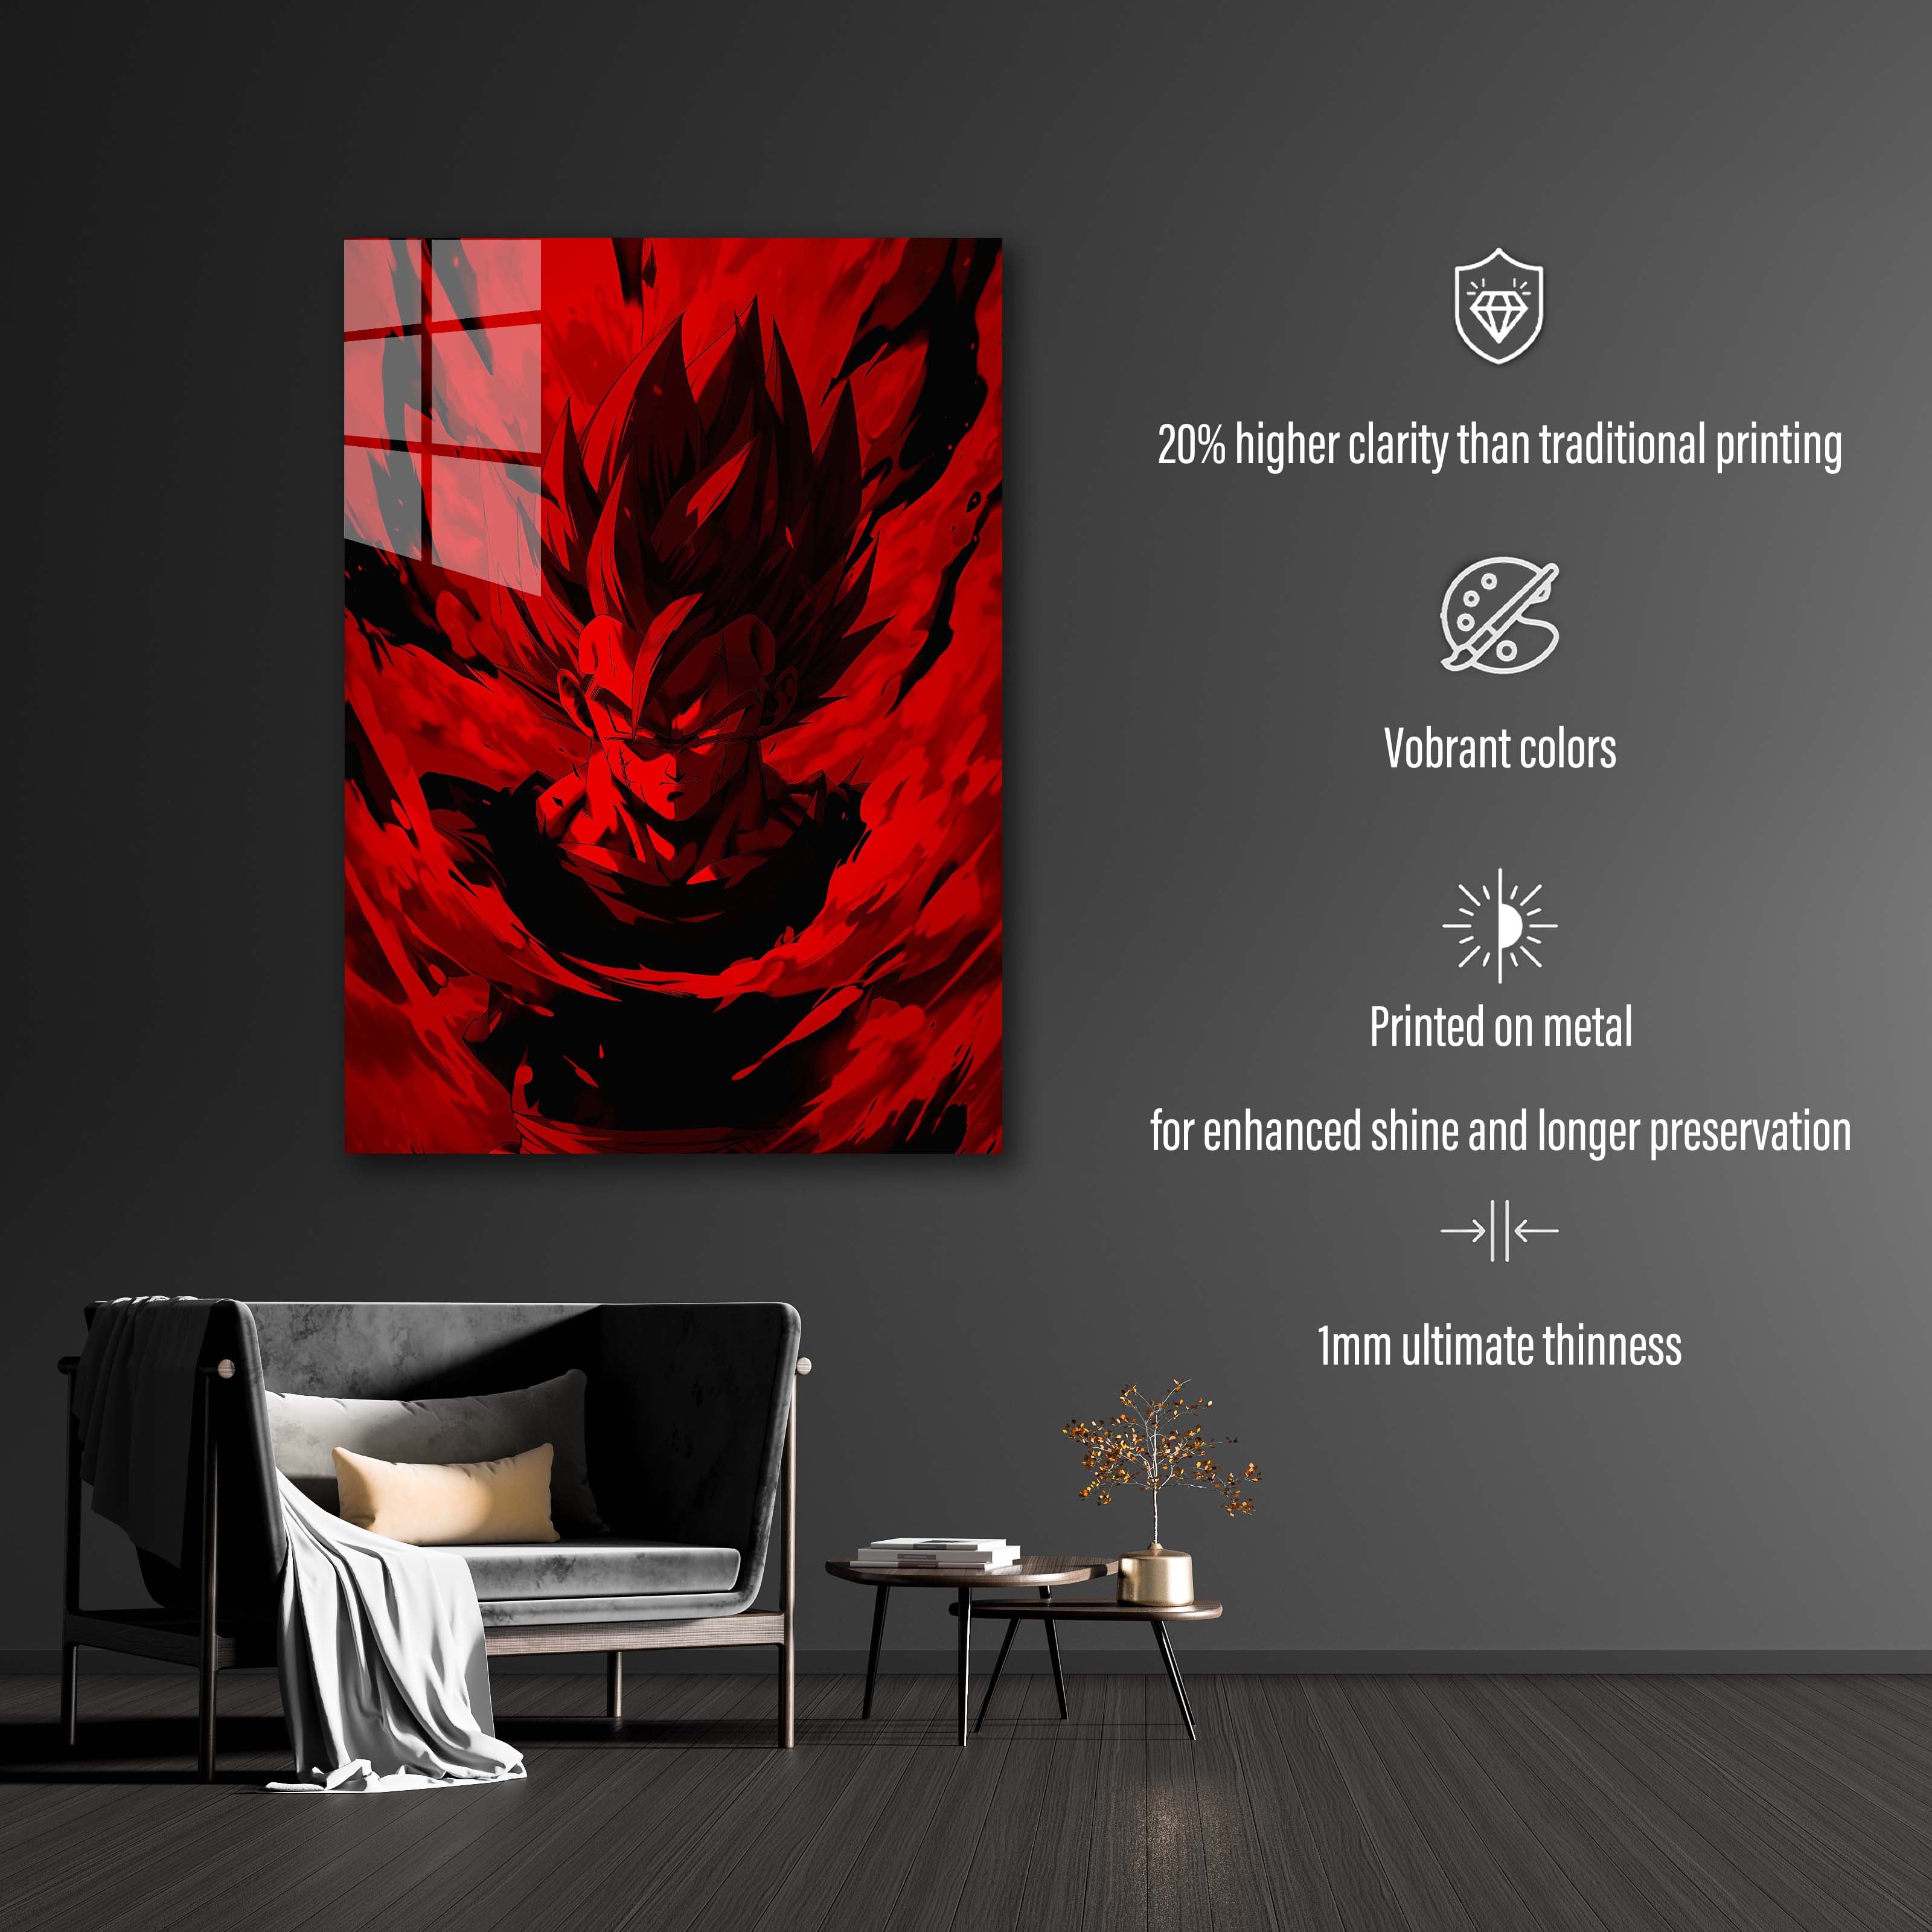 Dragon Ball Poster #vegeta red-designed by @Sawyer